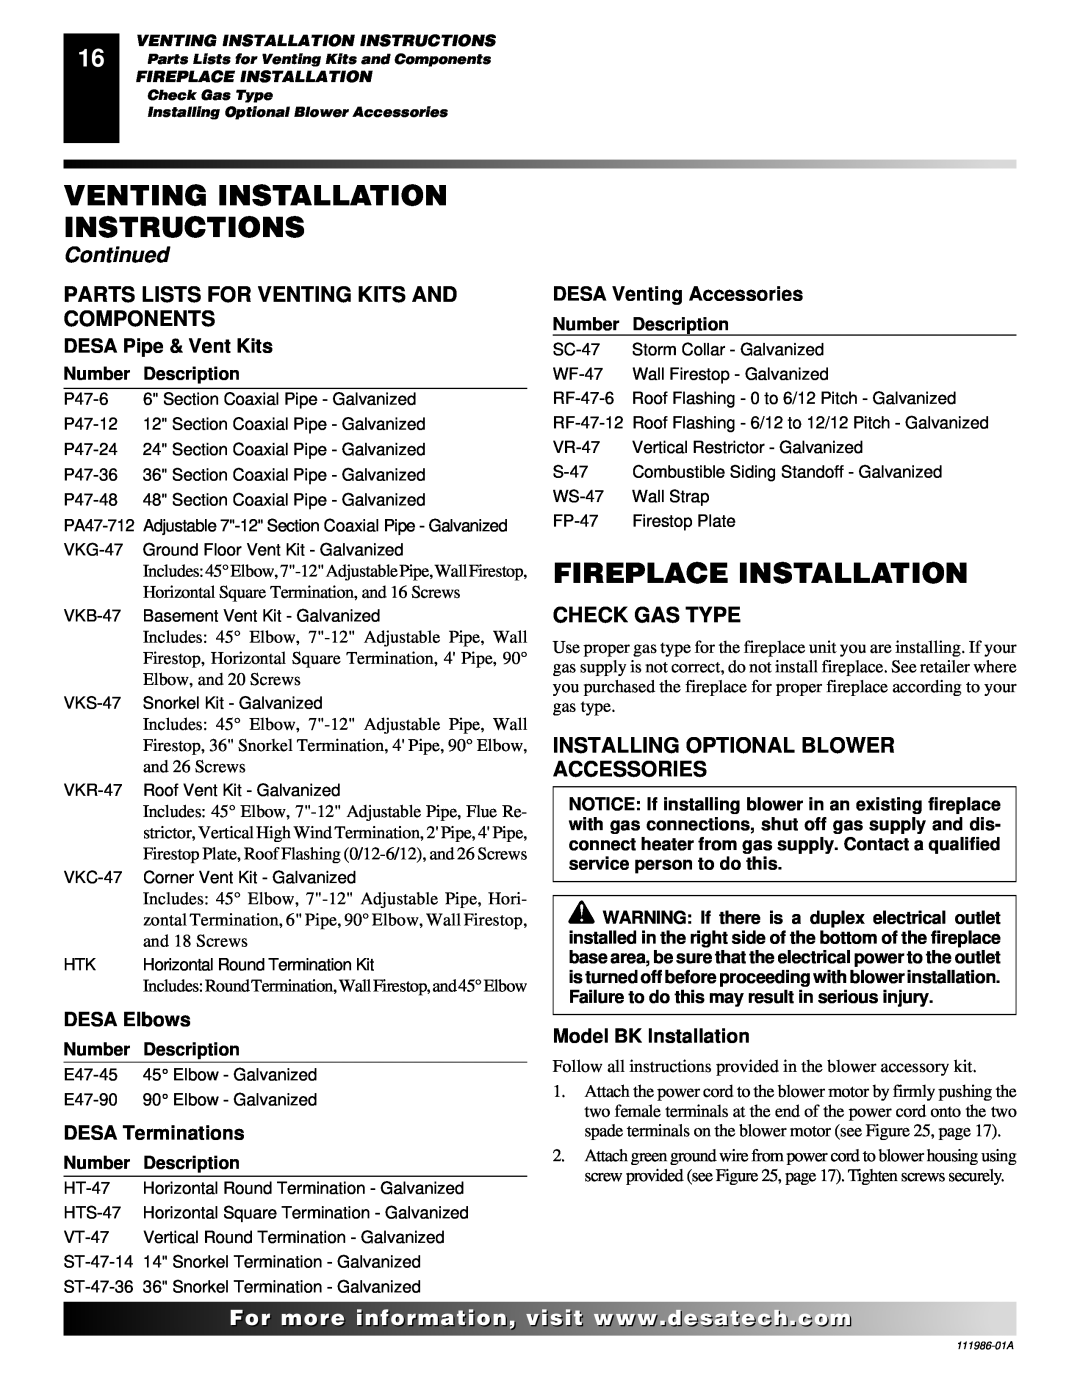 Desa T32P, T32N Fireplace Installation, Parts Lists For Venting Kits And Components, Check Gas Type, DESA Pipe & Vent Kits 